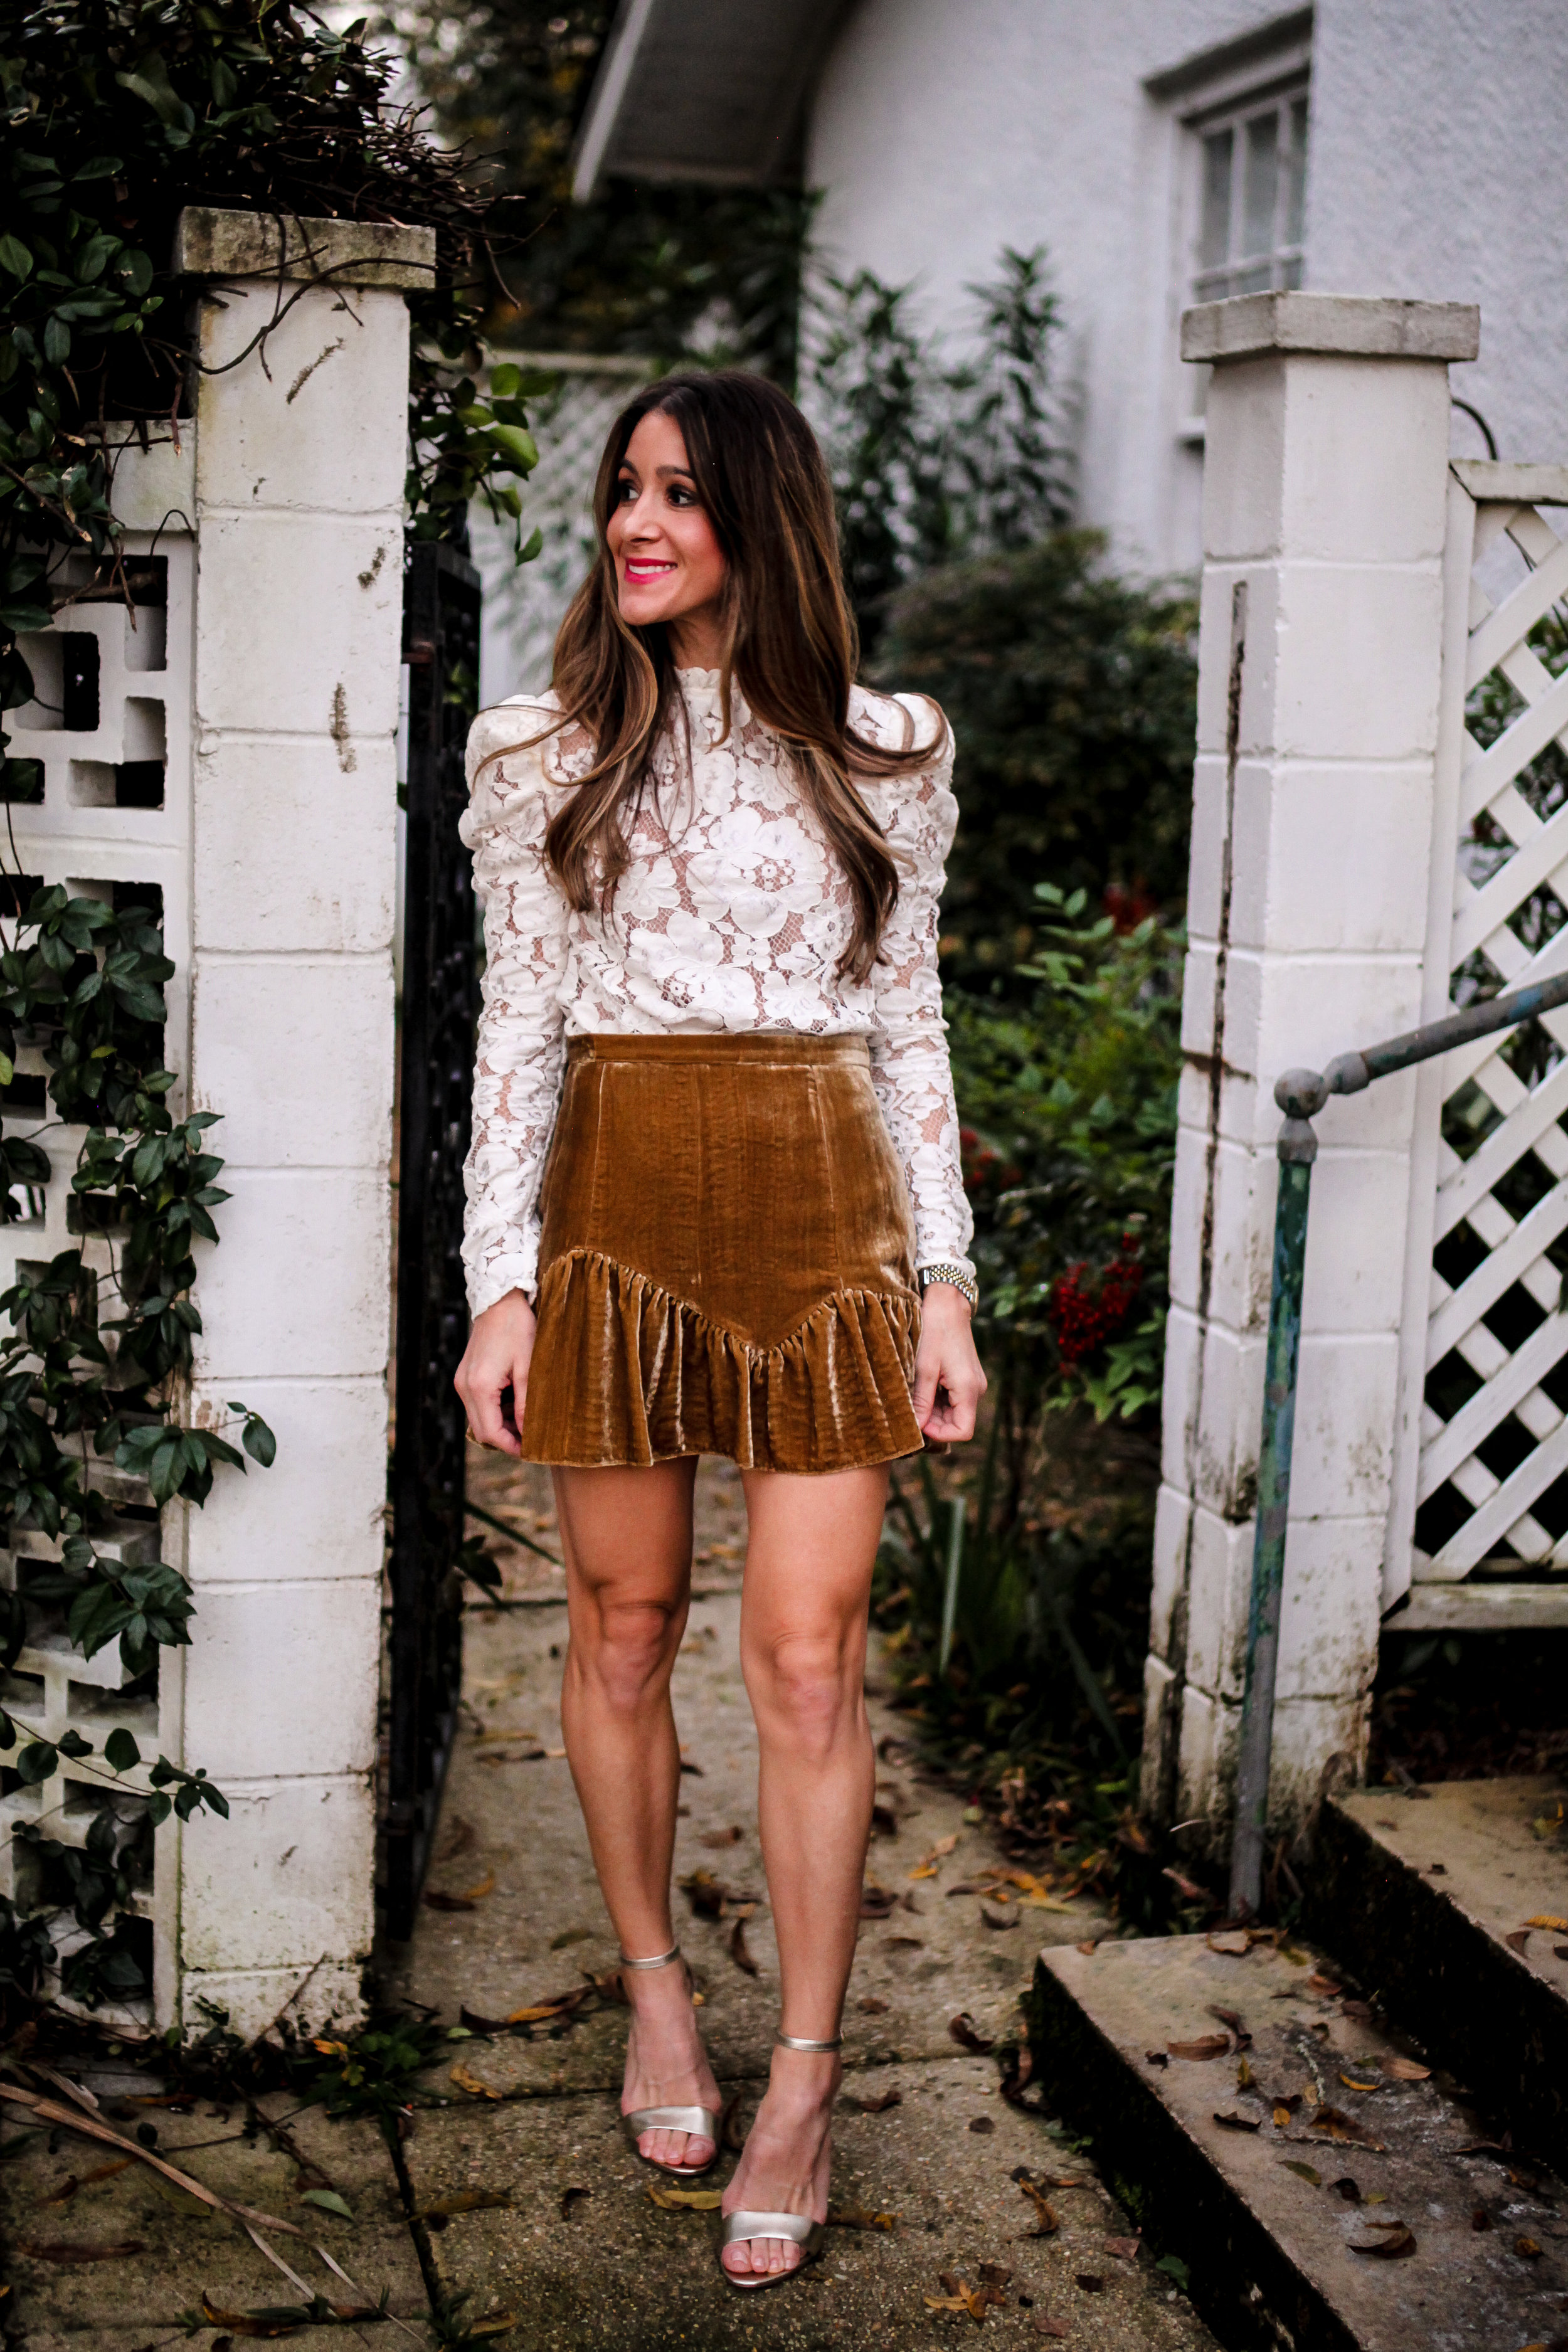  LACE TOP - WAYF - HERE | VELVET SKIRT - LOVE SHACK FANCY - HERE | SHOES - SAM EDELMAN - HERE | EARRINGS - LELE SADOUGHI - HERE | FAUX FUR CROPPED JACKET - OLD - SIMILAR HERE | 